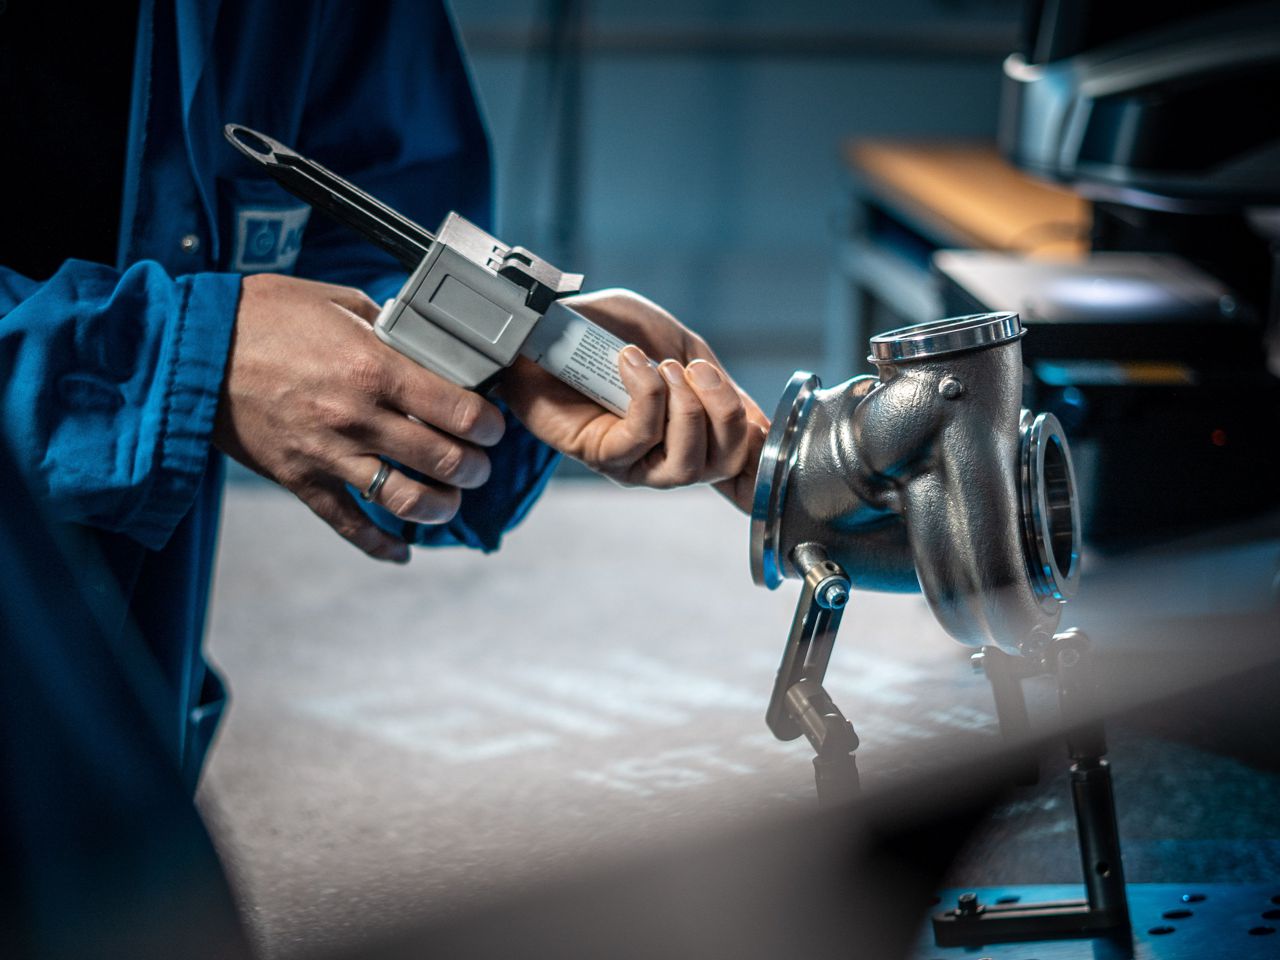 [Translate to Englisch:] an employee injects a silicone compound into a turbocharger